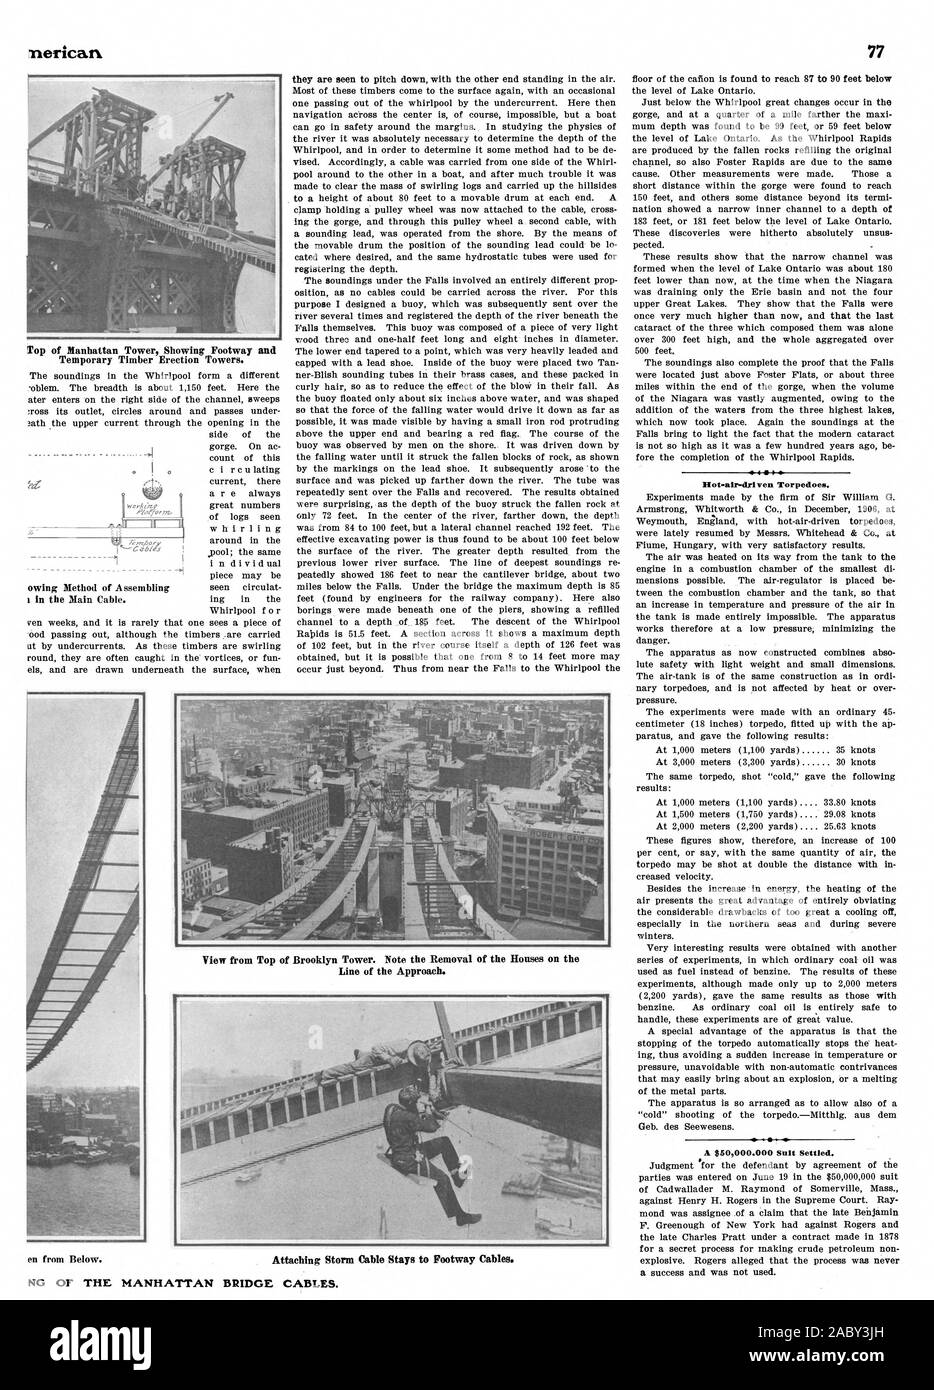 View from Top of Brooklyn Tower. Note the Removal of the Houses on the Line of the Approach. Attaching Storm Cable Stays to Footway Cables. Hot-air-driven Torpedoes. $50000.000 Suit Settled. NG OF THE MANHATTAN BRIDGE CABLES., scientific american, 1908-08-01 Stock Photo